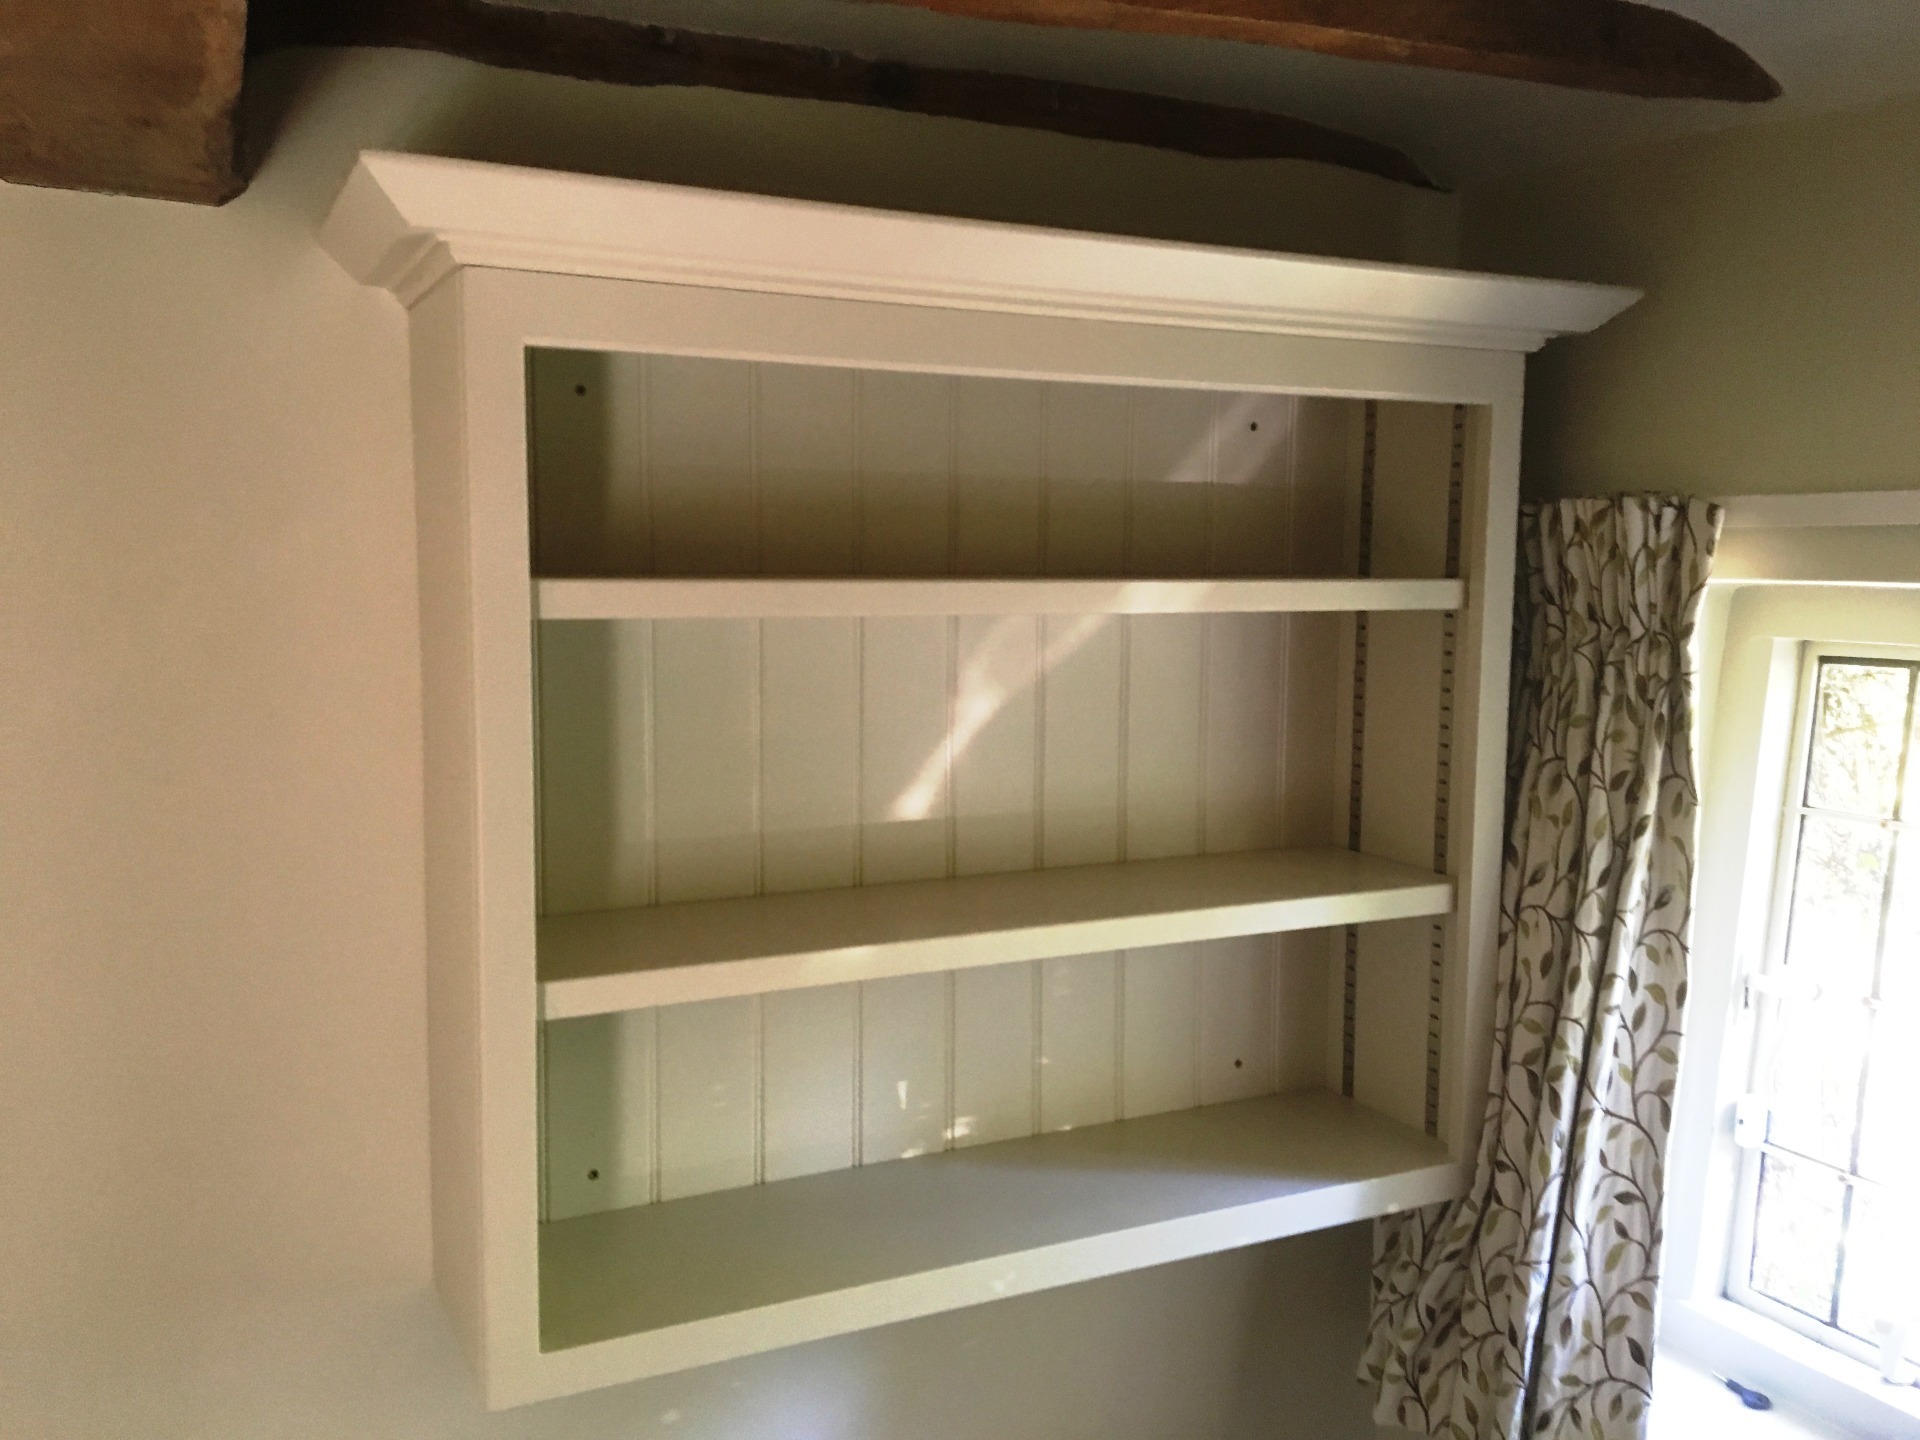 Hand-made bookcase